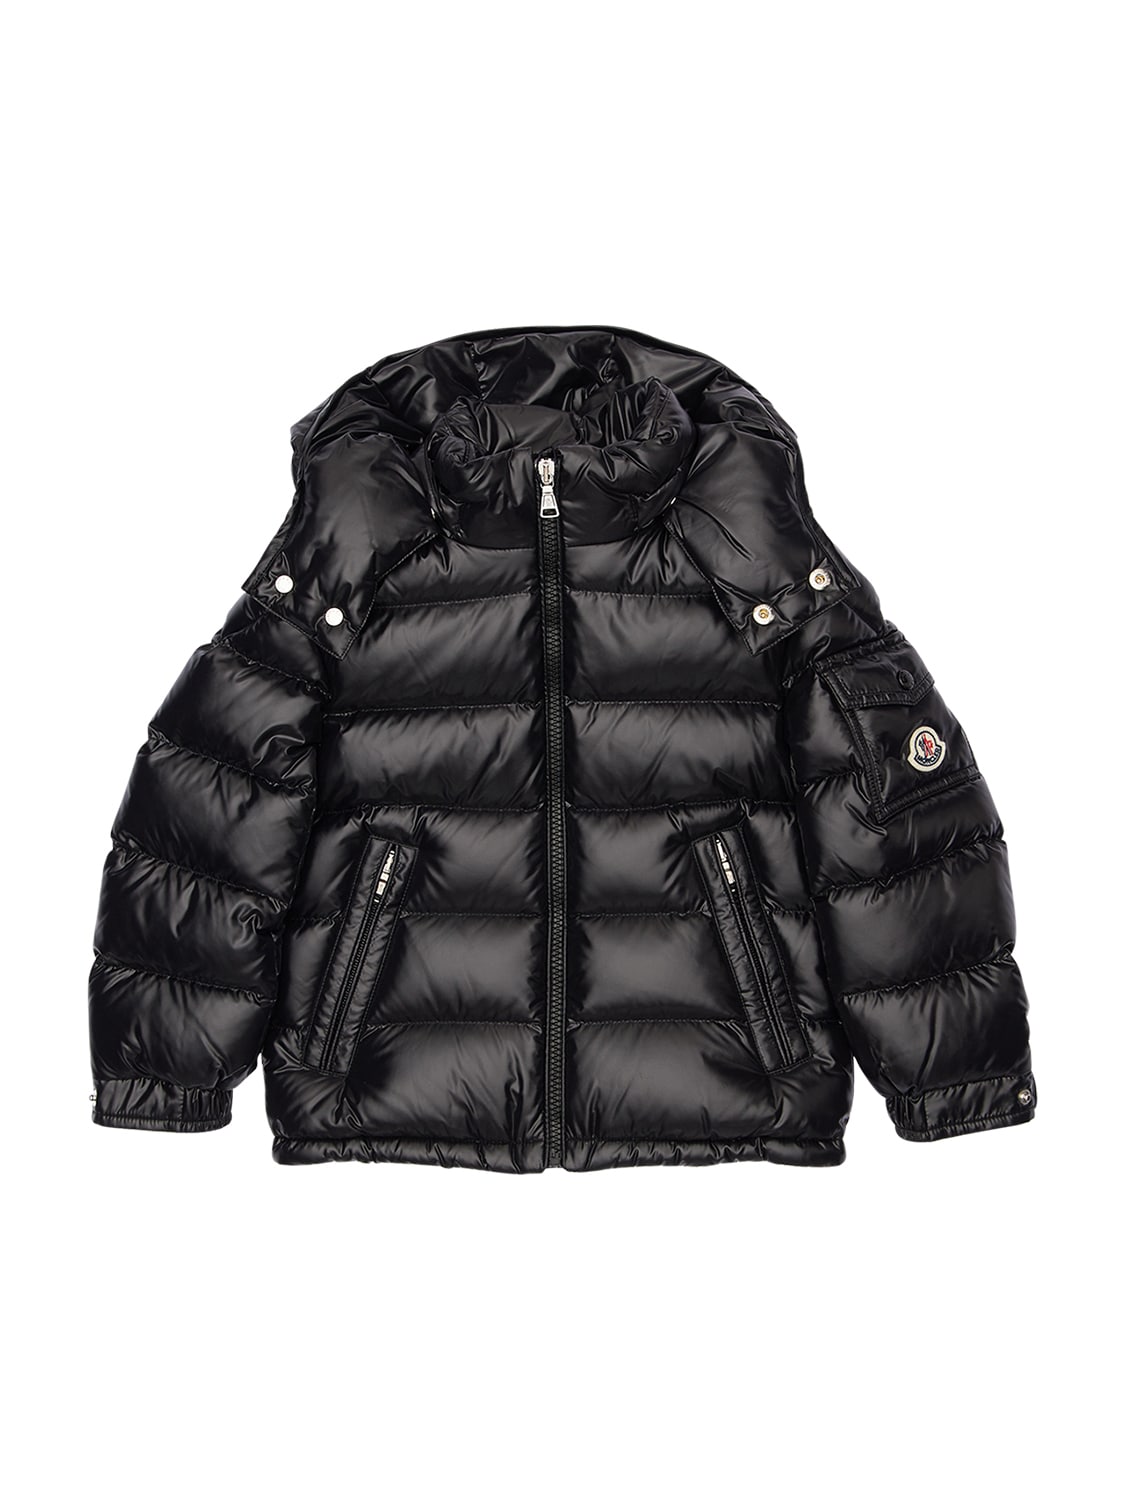 moncler water resistant